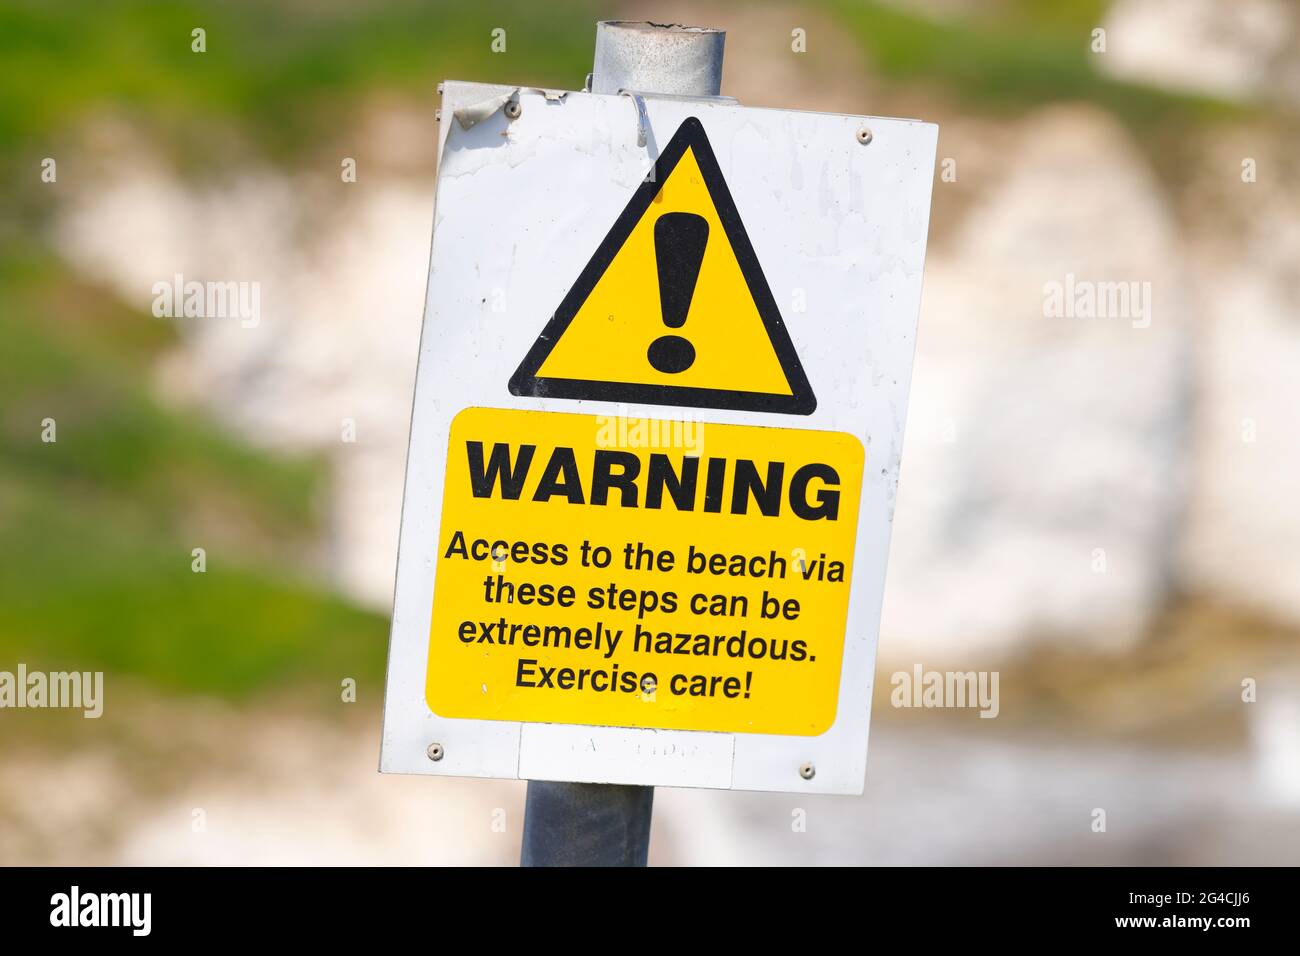 A warning sign to pedestrians who wish to descend to a beach at Selwick Bay from cliff tops in Flamborough,East Yorkshire,UK Stock Photo